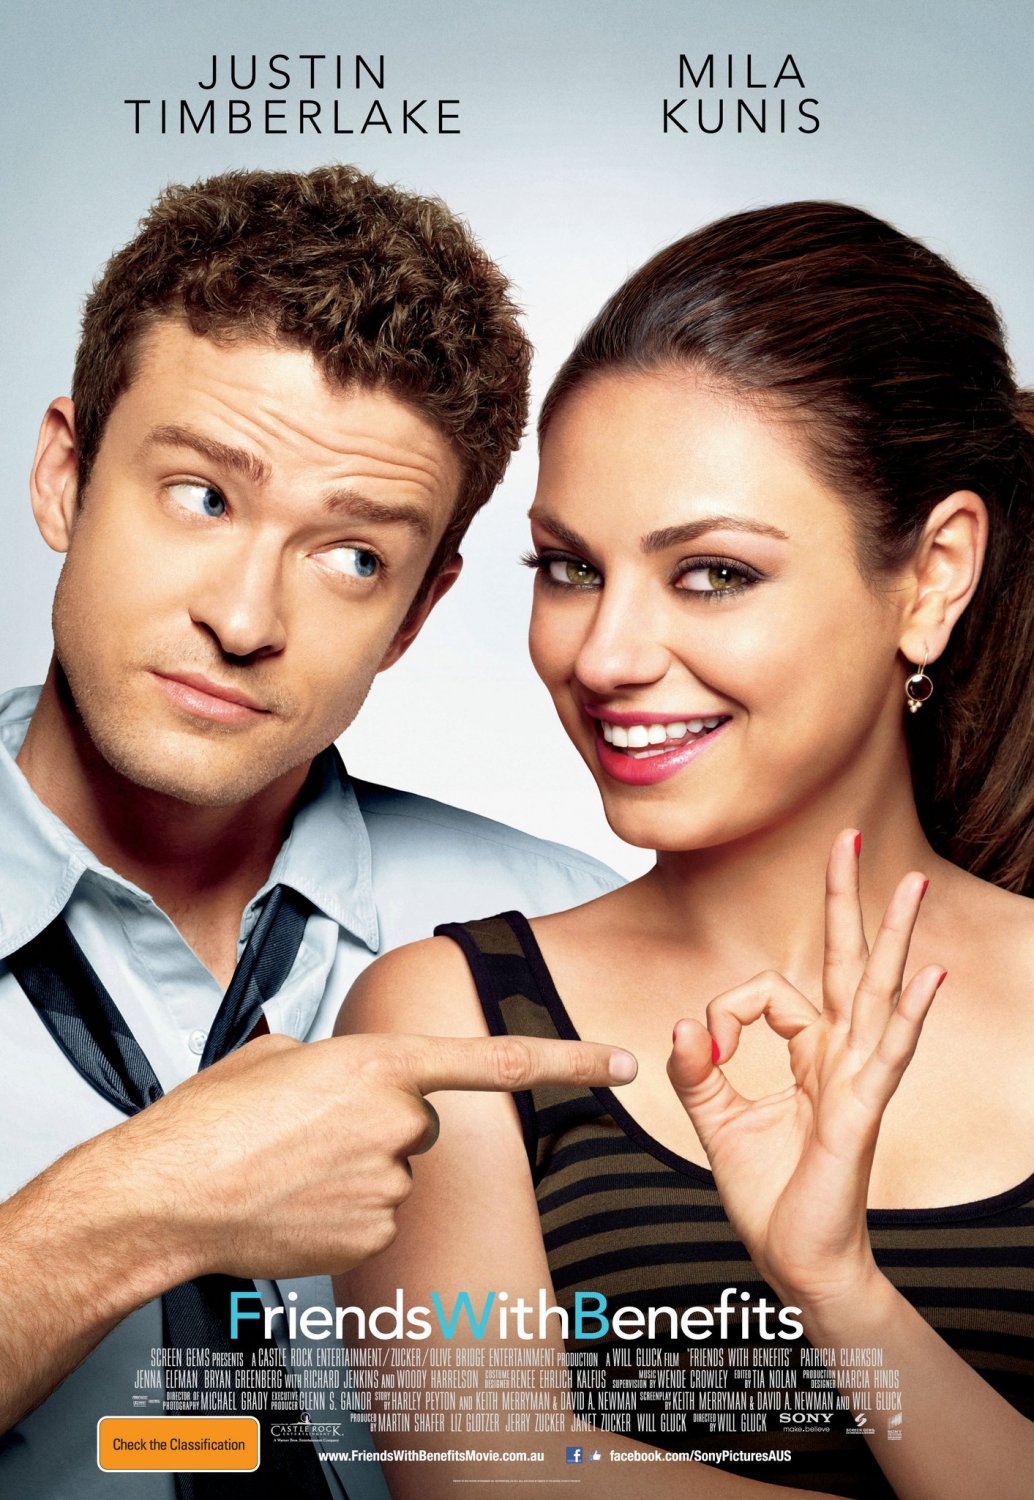 Friends With Benefits Movie Soundtrack - Download Movies Music ...